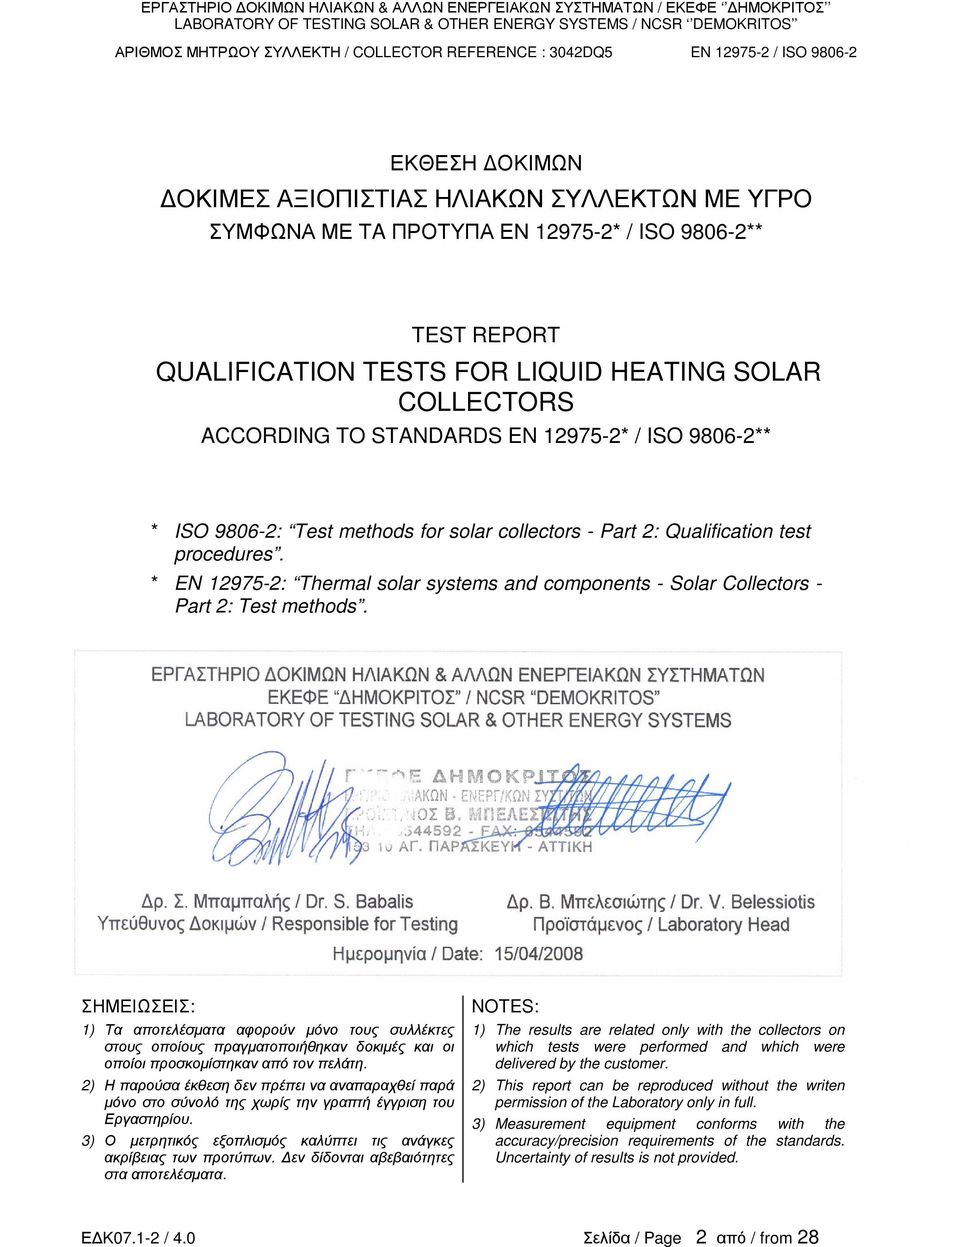 * EN 129752: Thermal solar systems and components Solar Collectors Part 2: Test methods.